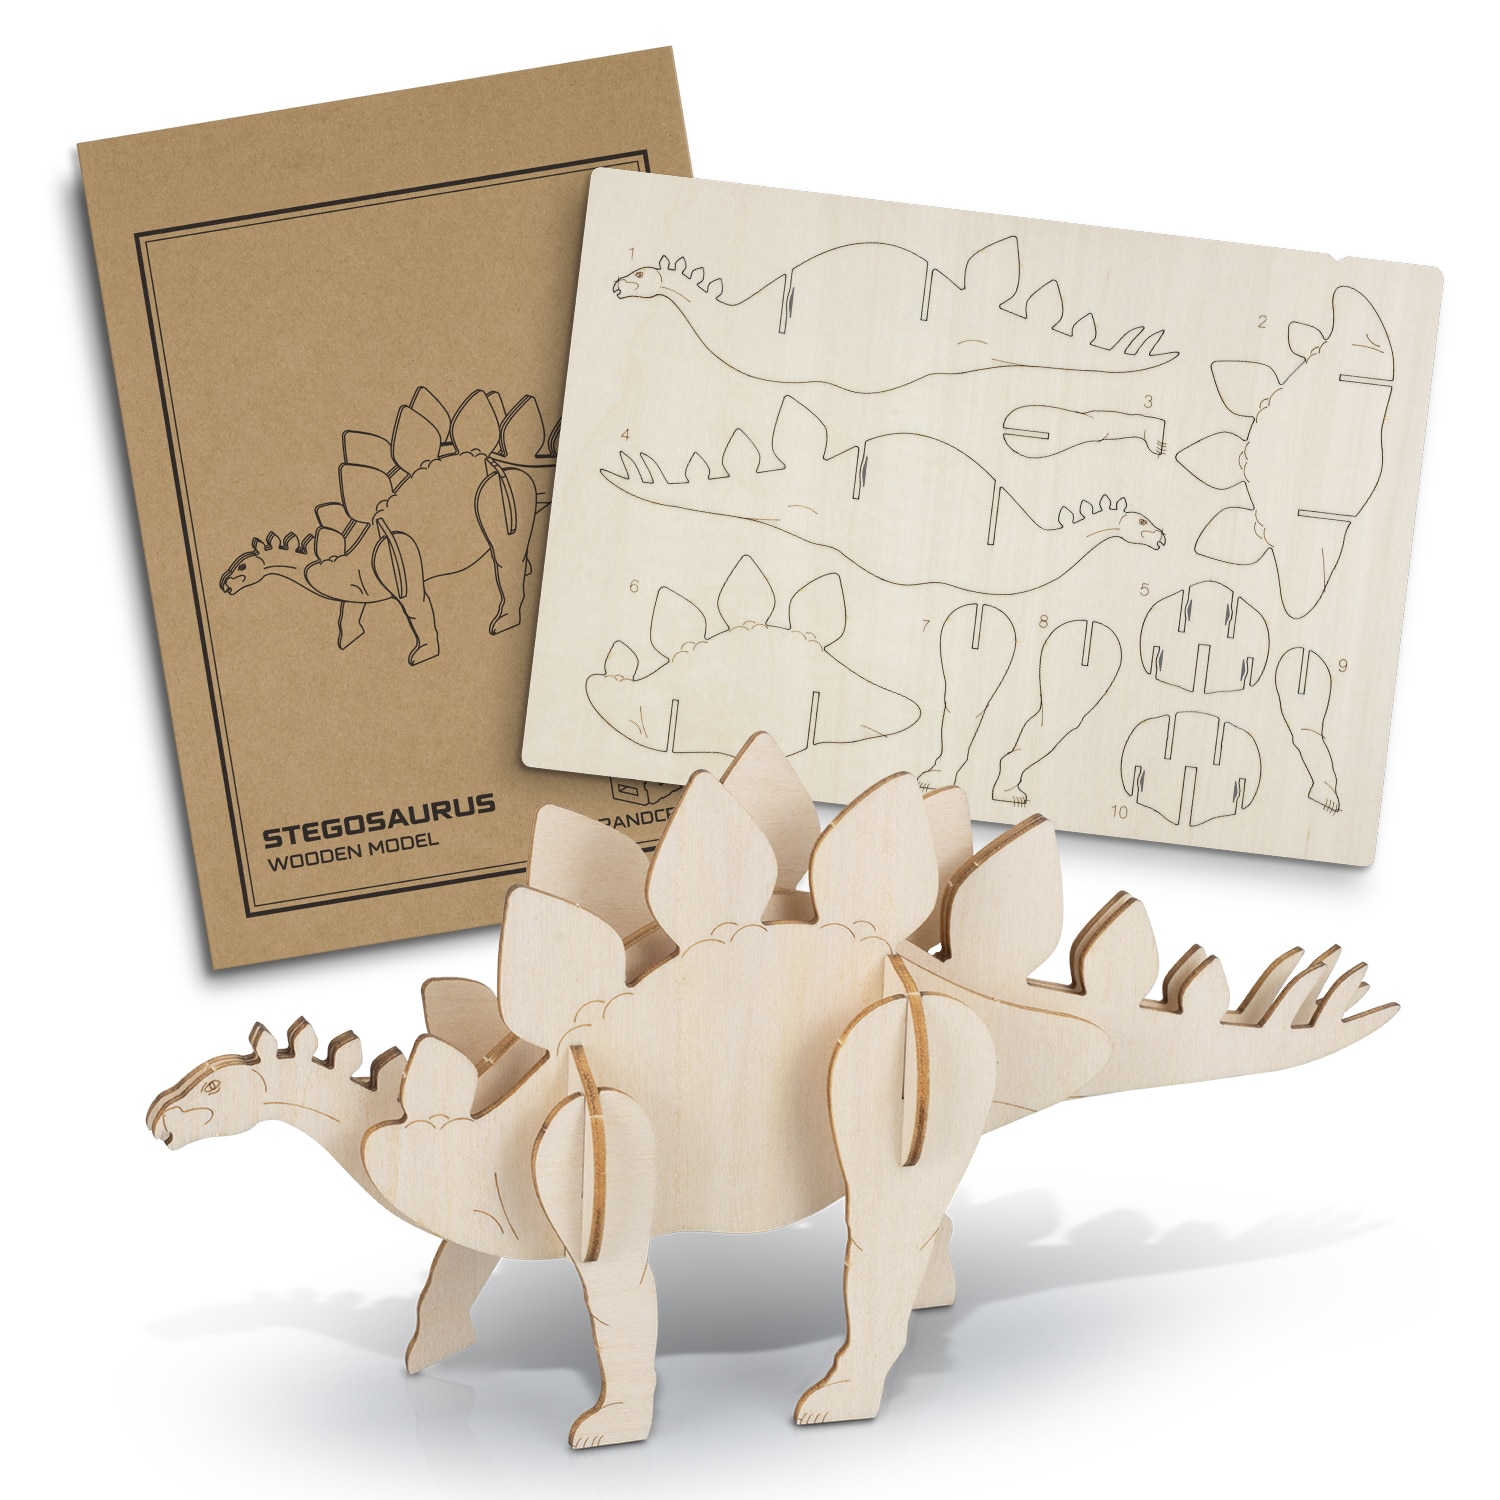 The Branding Business feature product for this week is the sustainable promotional product Stegosaurus Wooden Model. A great sustainable promotional product, Kids promotional product and STEM Promotional Product.